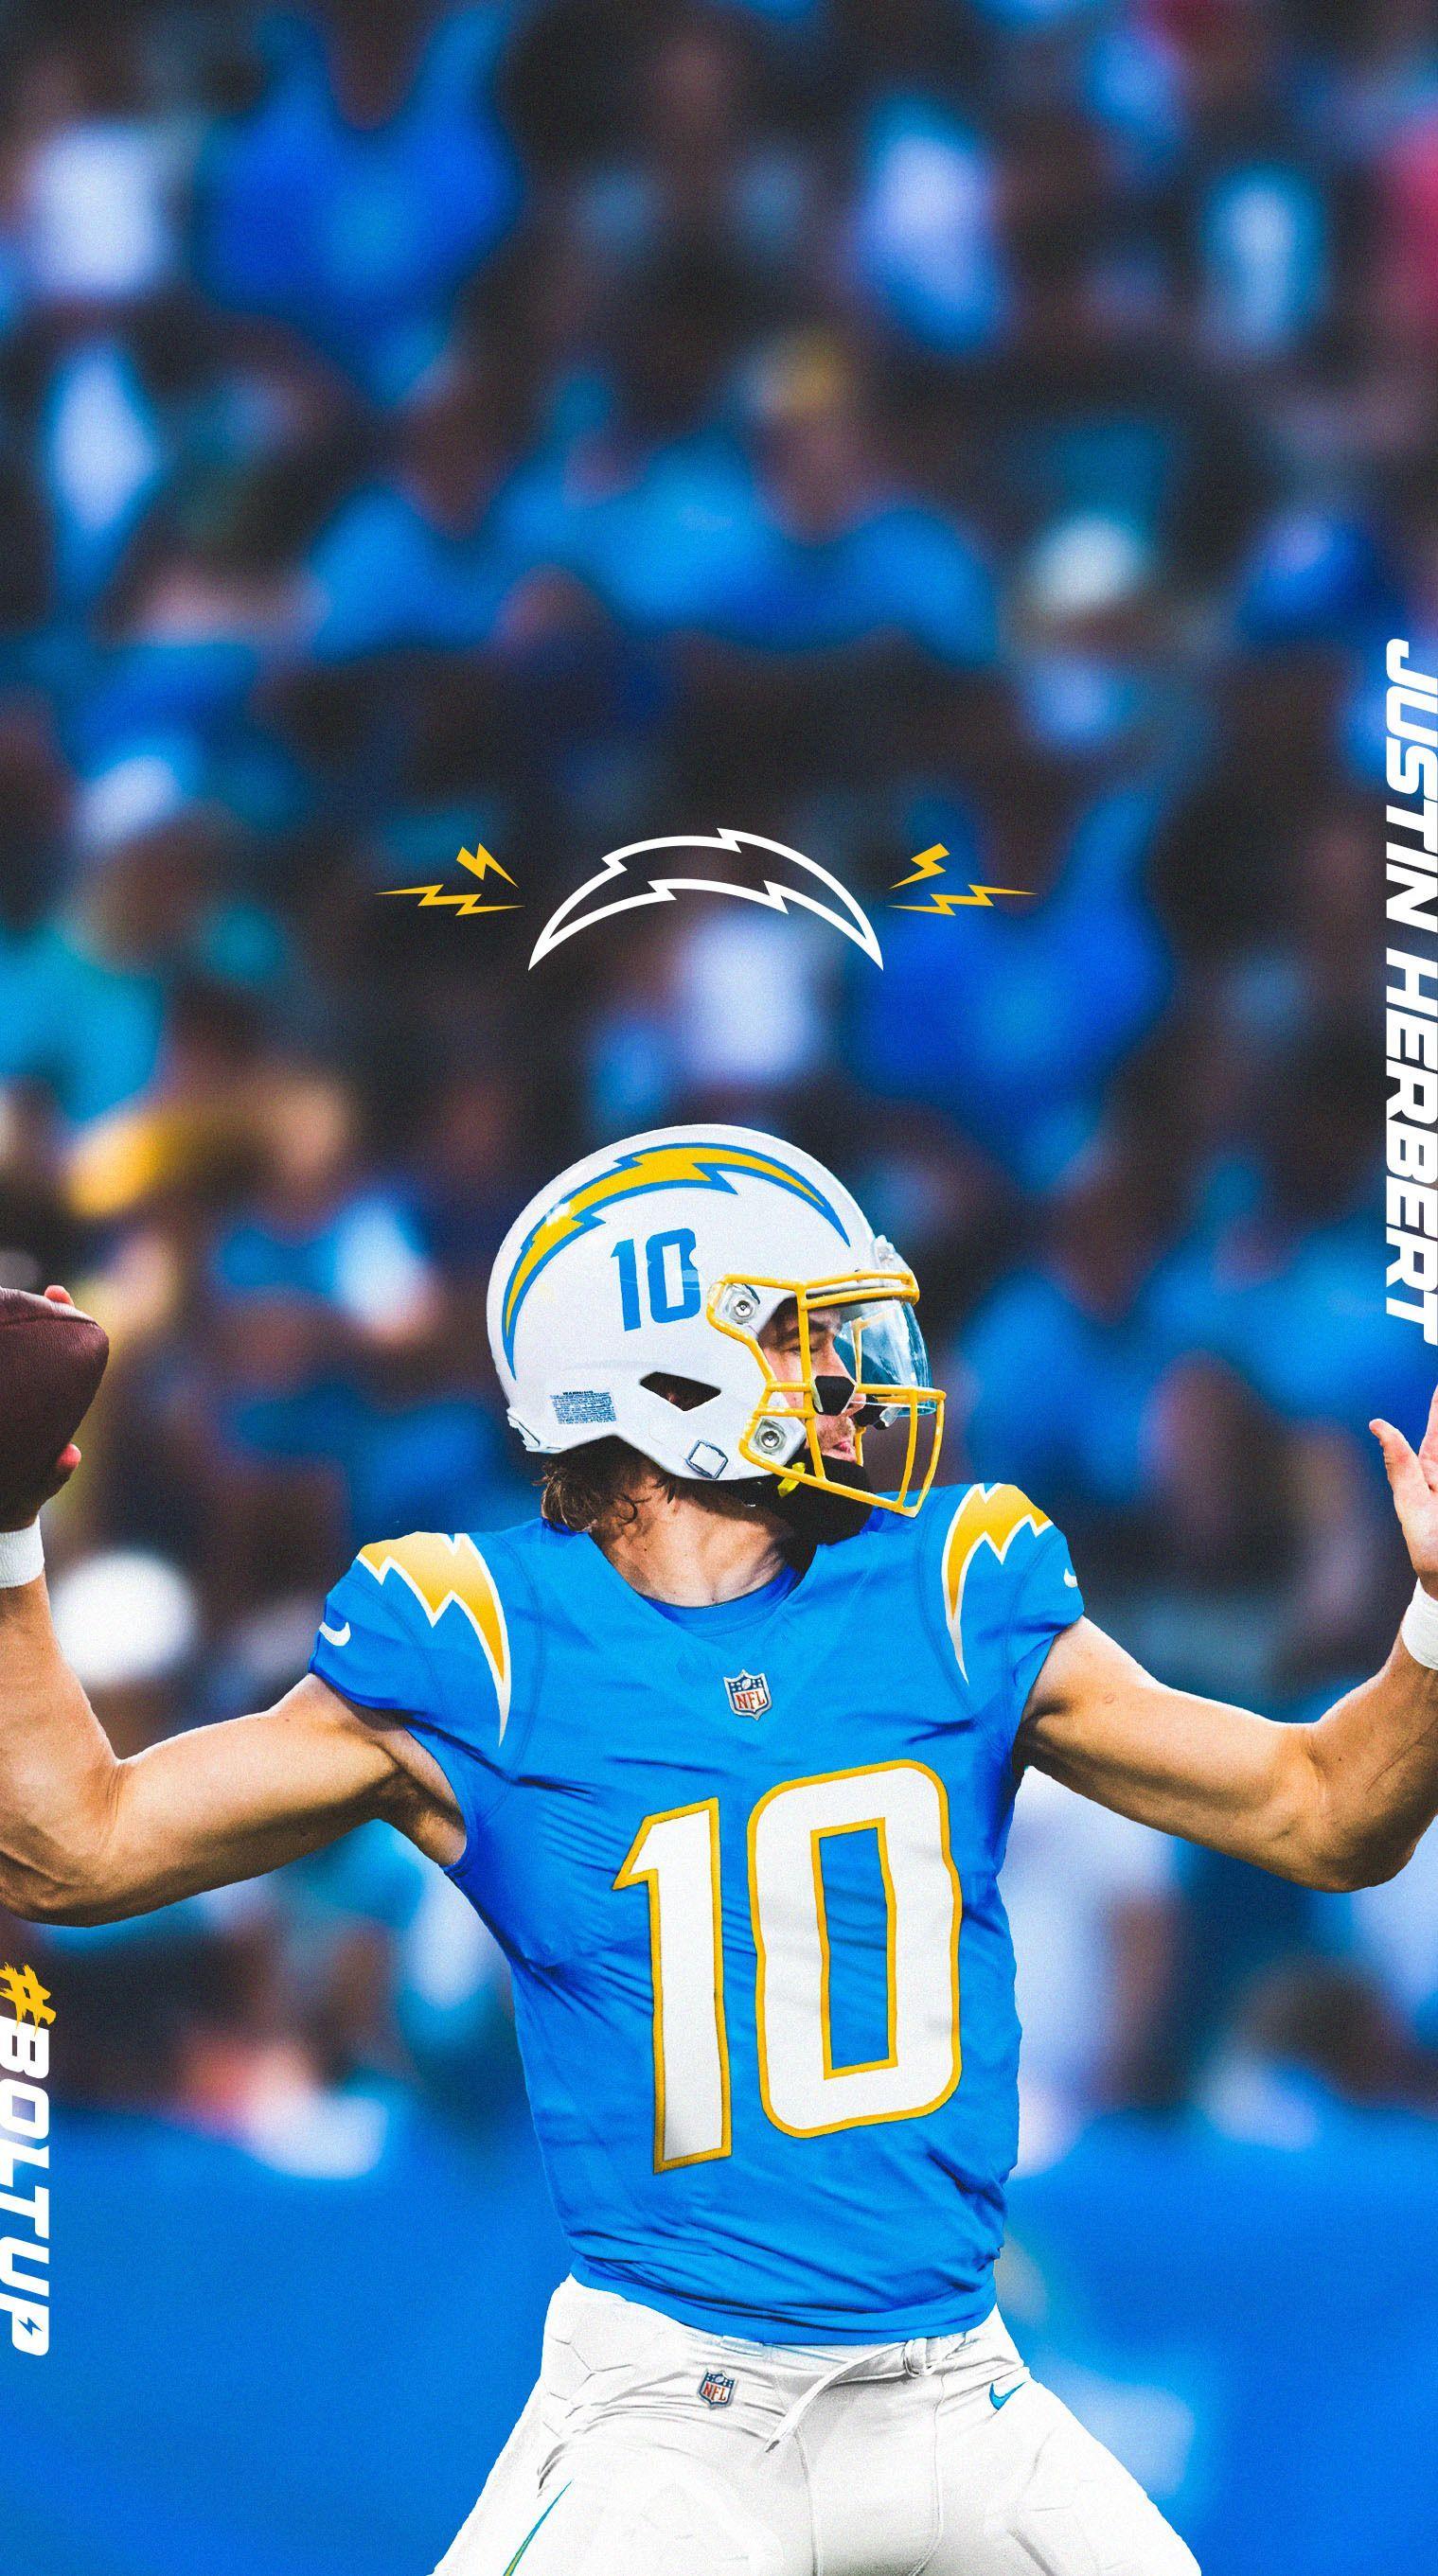 new unis x new wallpapers    Los Angeles Chargers  Facebook